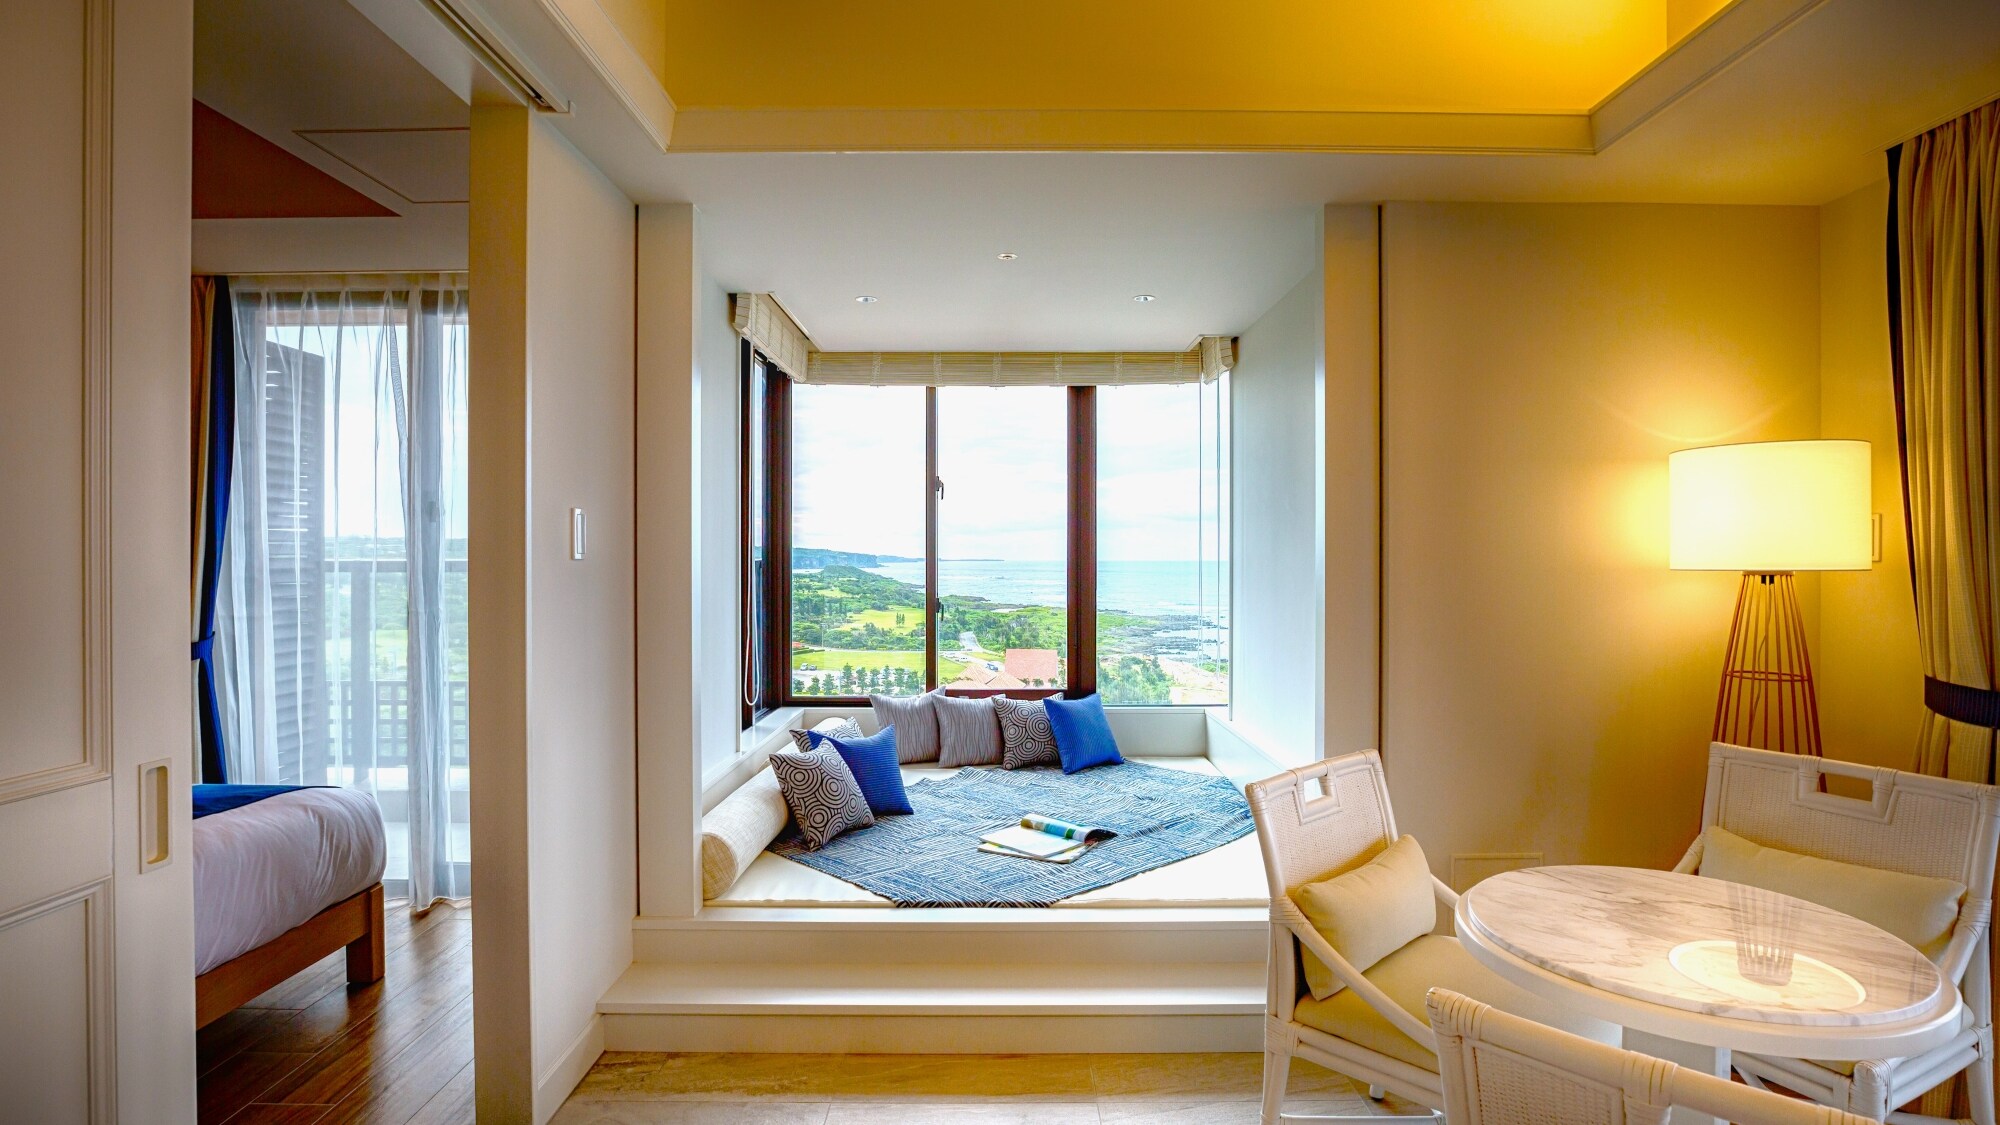 [Mirage Floor/Premier Suite] Enjoy a relaxing style such as taking a nap on the daybed by the window.